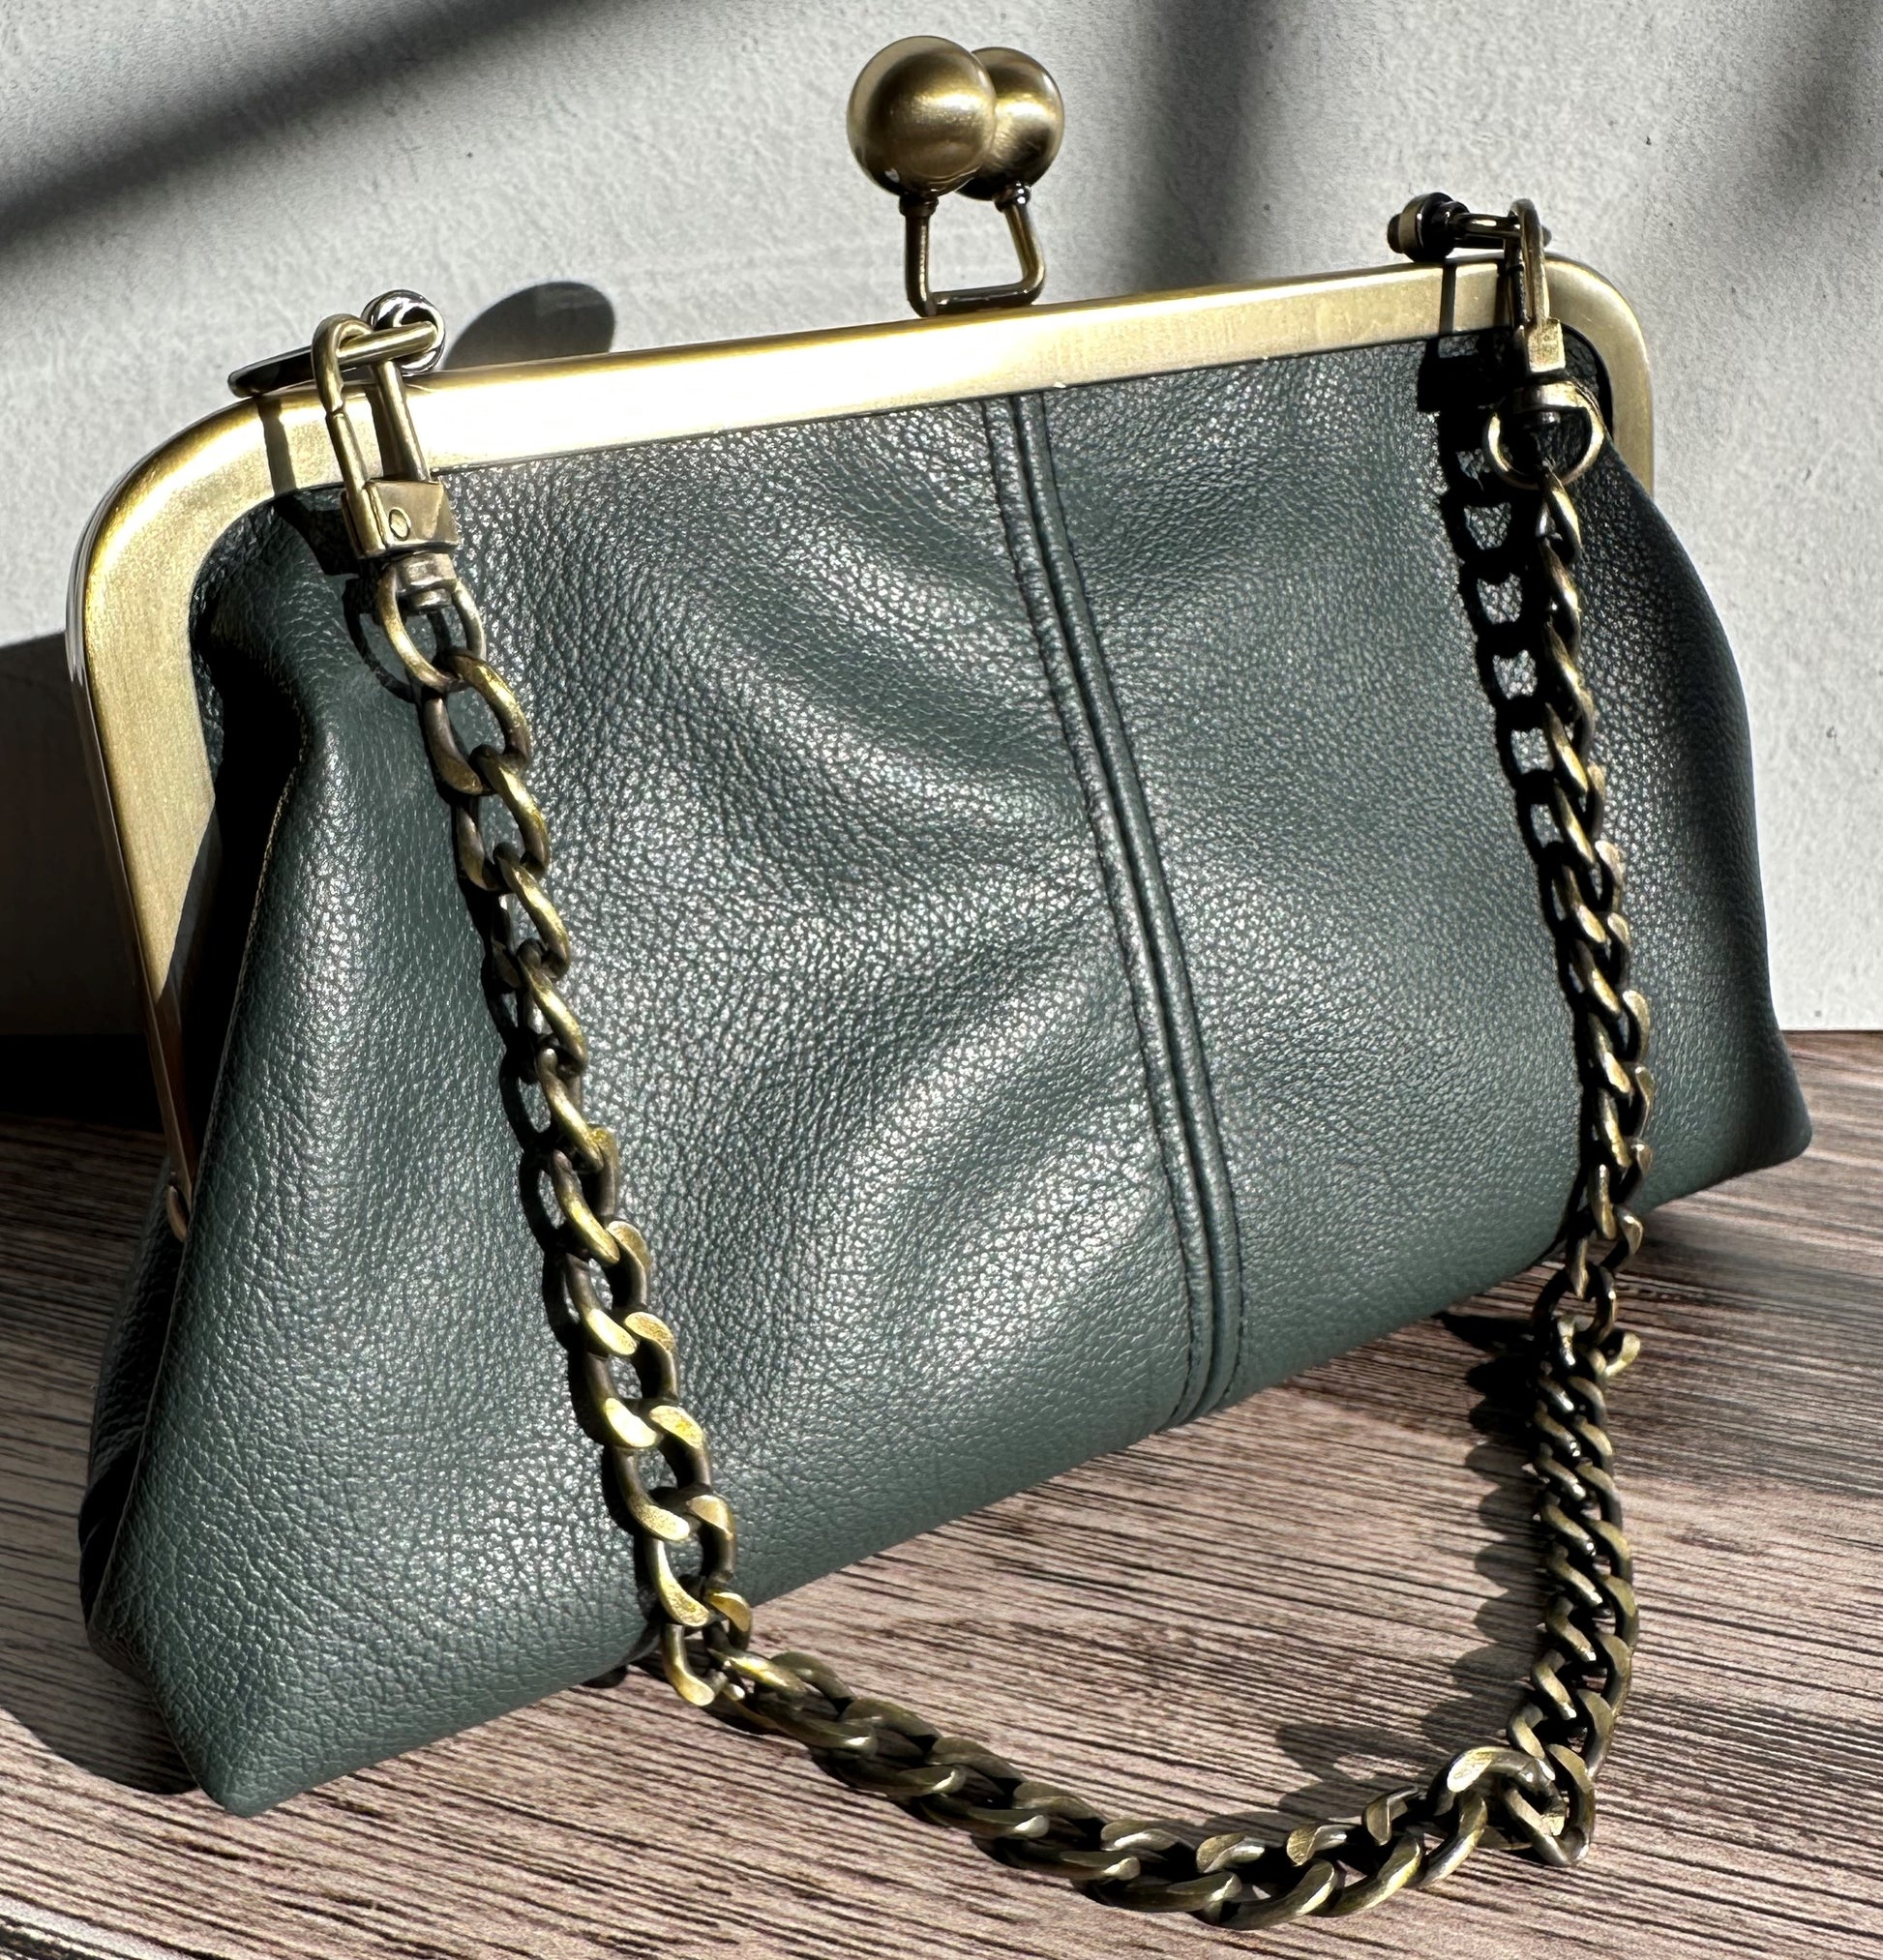 Forest Green Leather with Bronze Kiss Lock & Chains Smith Island Purse SquiresCanvasCreations